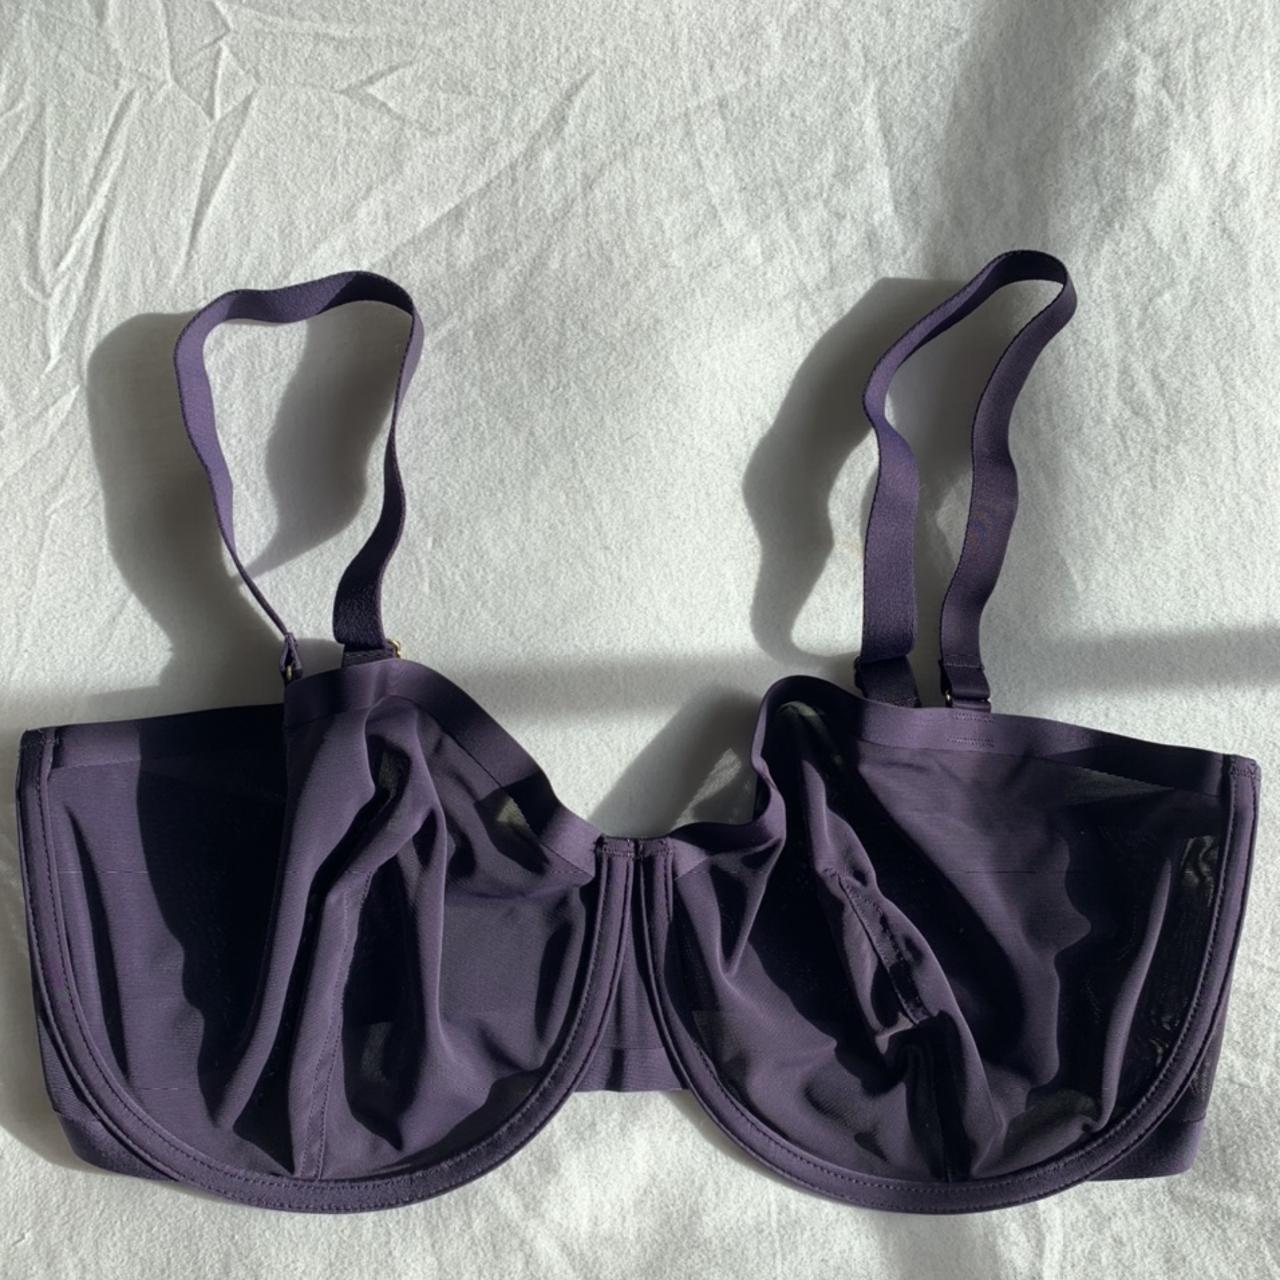 CUUP the Balconette Bra 36G color: Dusk new without - Depop